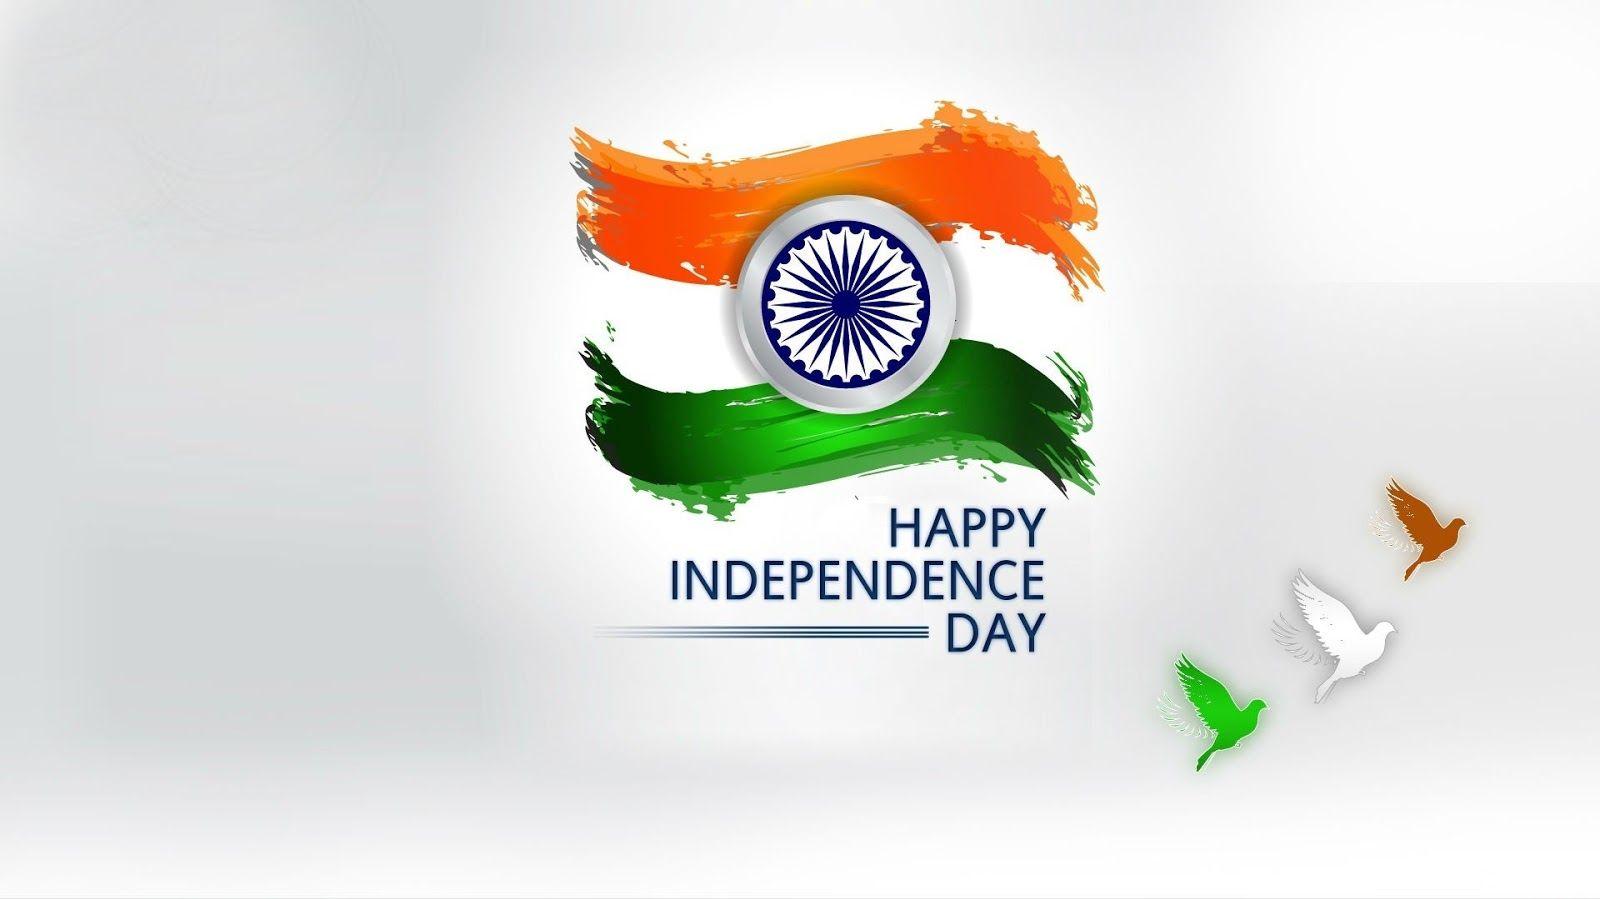 Happy Independence Day HD Wallpapers Images Photos WALLPAPERS